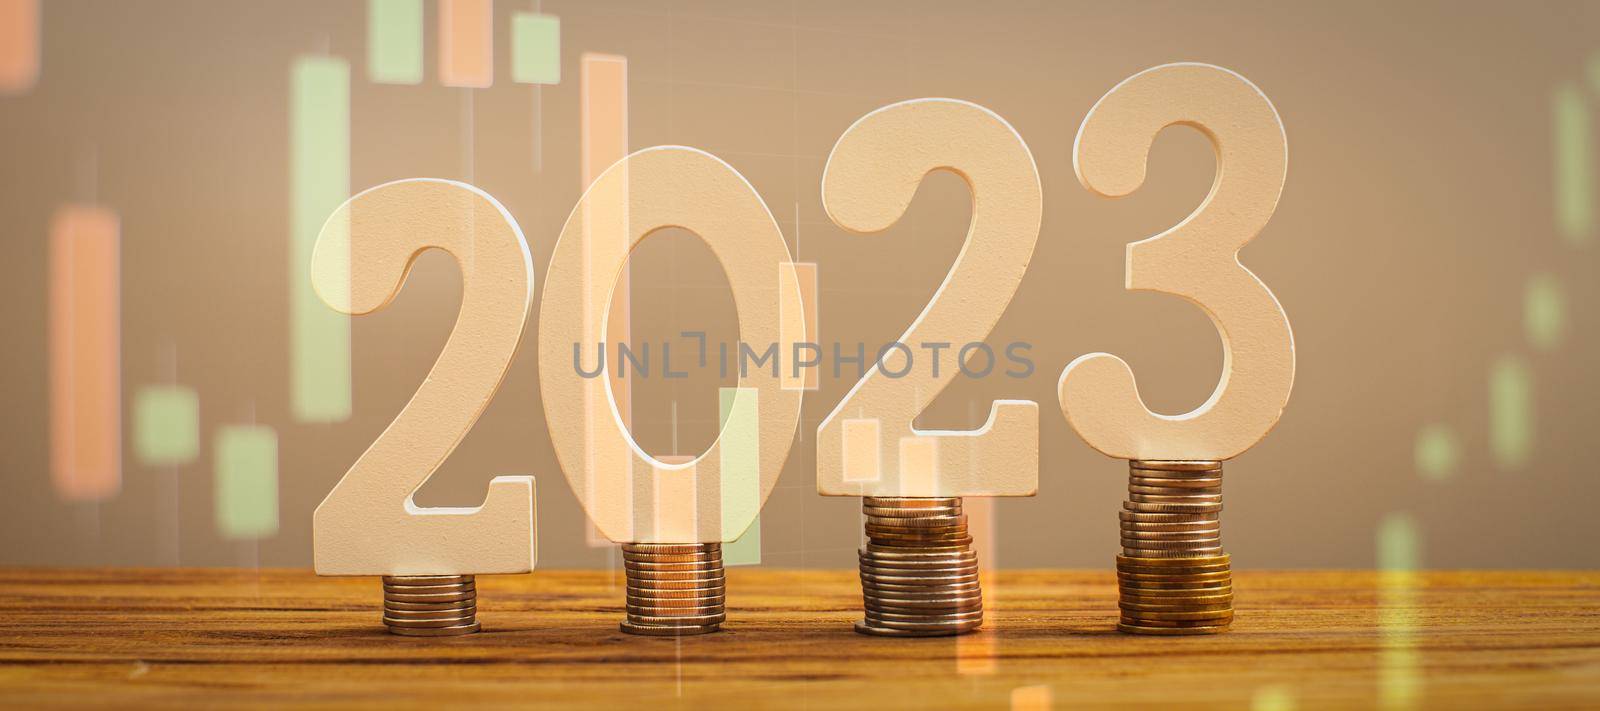 2023 on the stack of coins. tax payment, investment, and banking concept. 2023 new year saving money and financial planning concept by Maximusnd